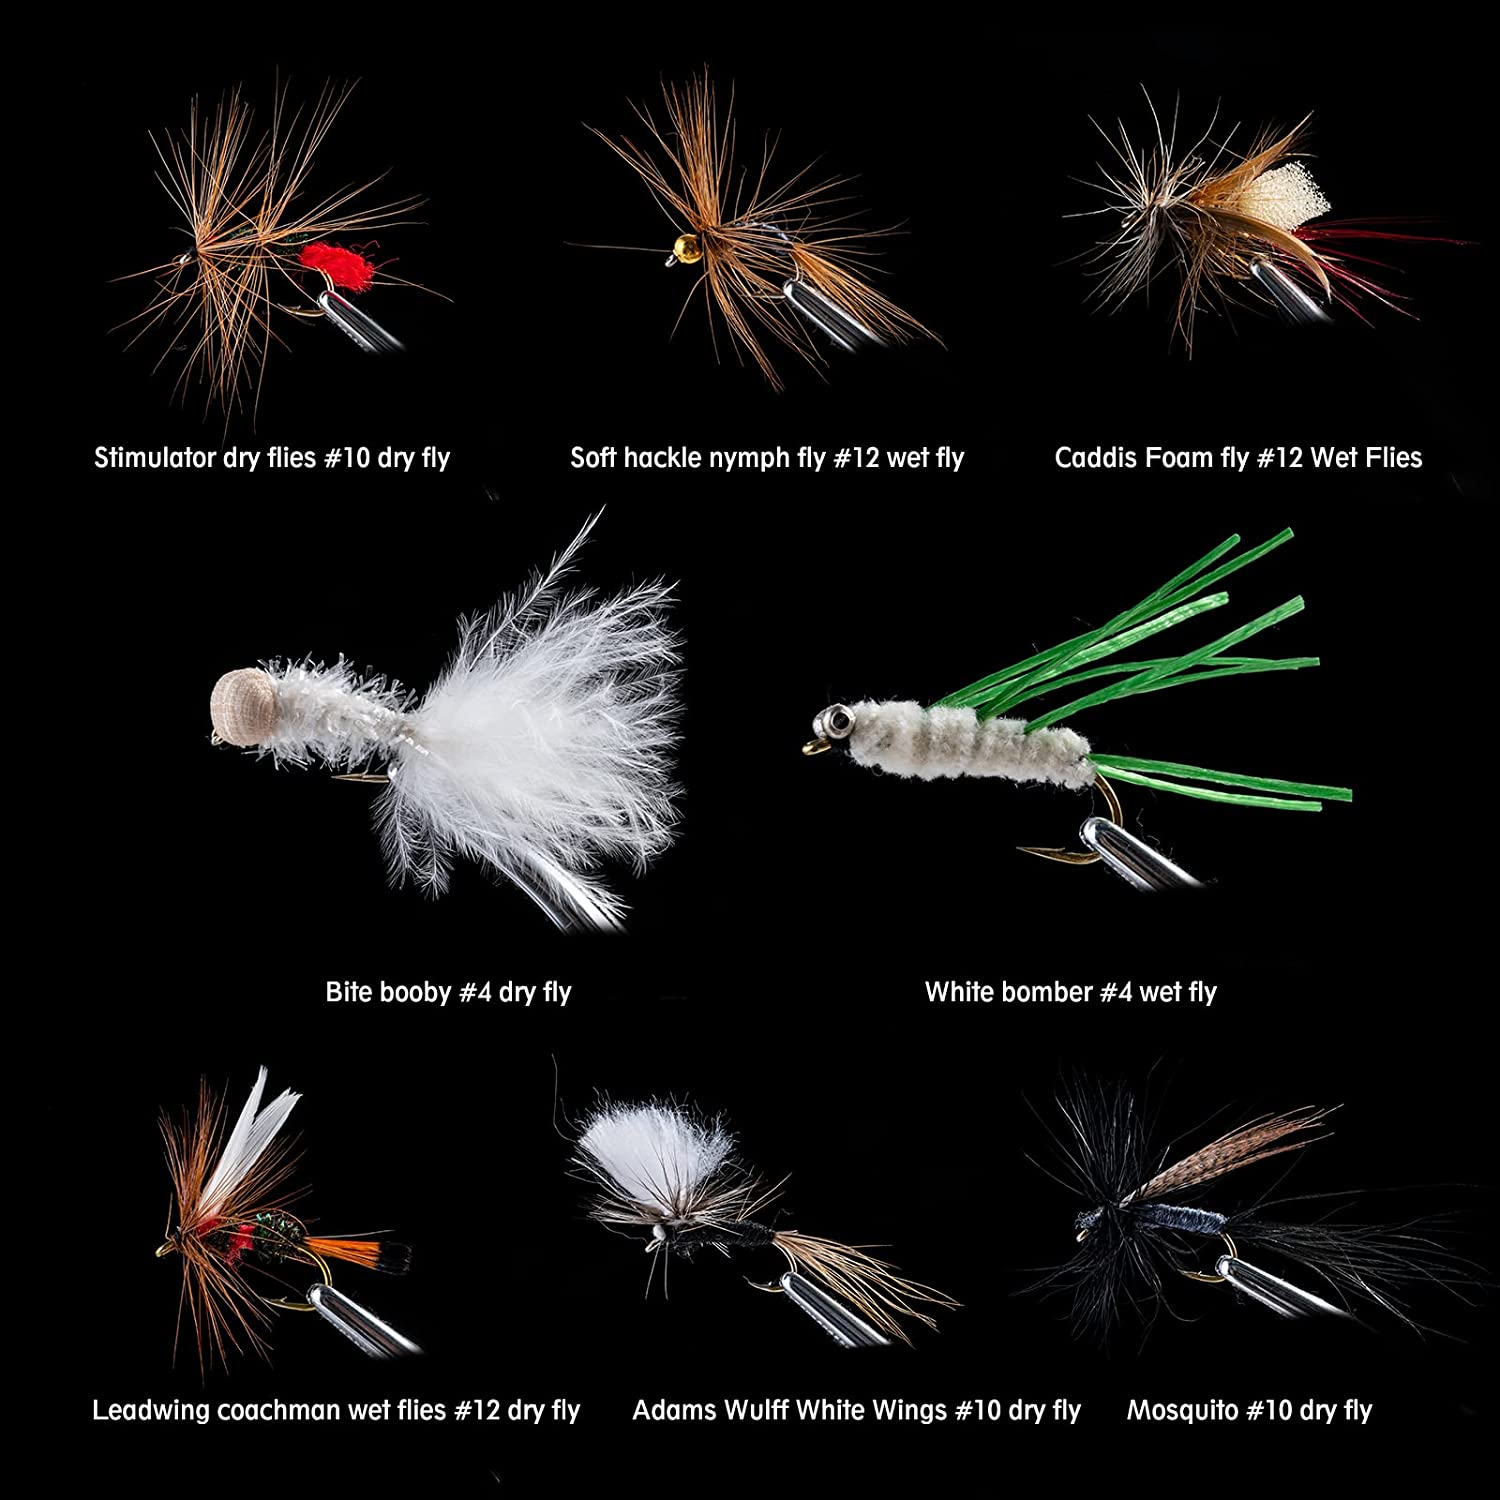 Goture Fly Fishing Flies Kit - 10/30/40/76/100pcs Fly Fishing Lures with  Fly Fishing Box - Fly Fishing Assortment Kit for Bass Trout Salmon Fishing  